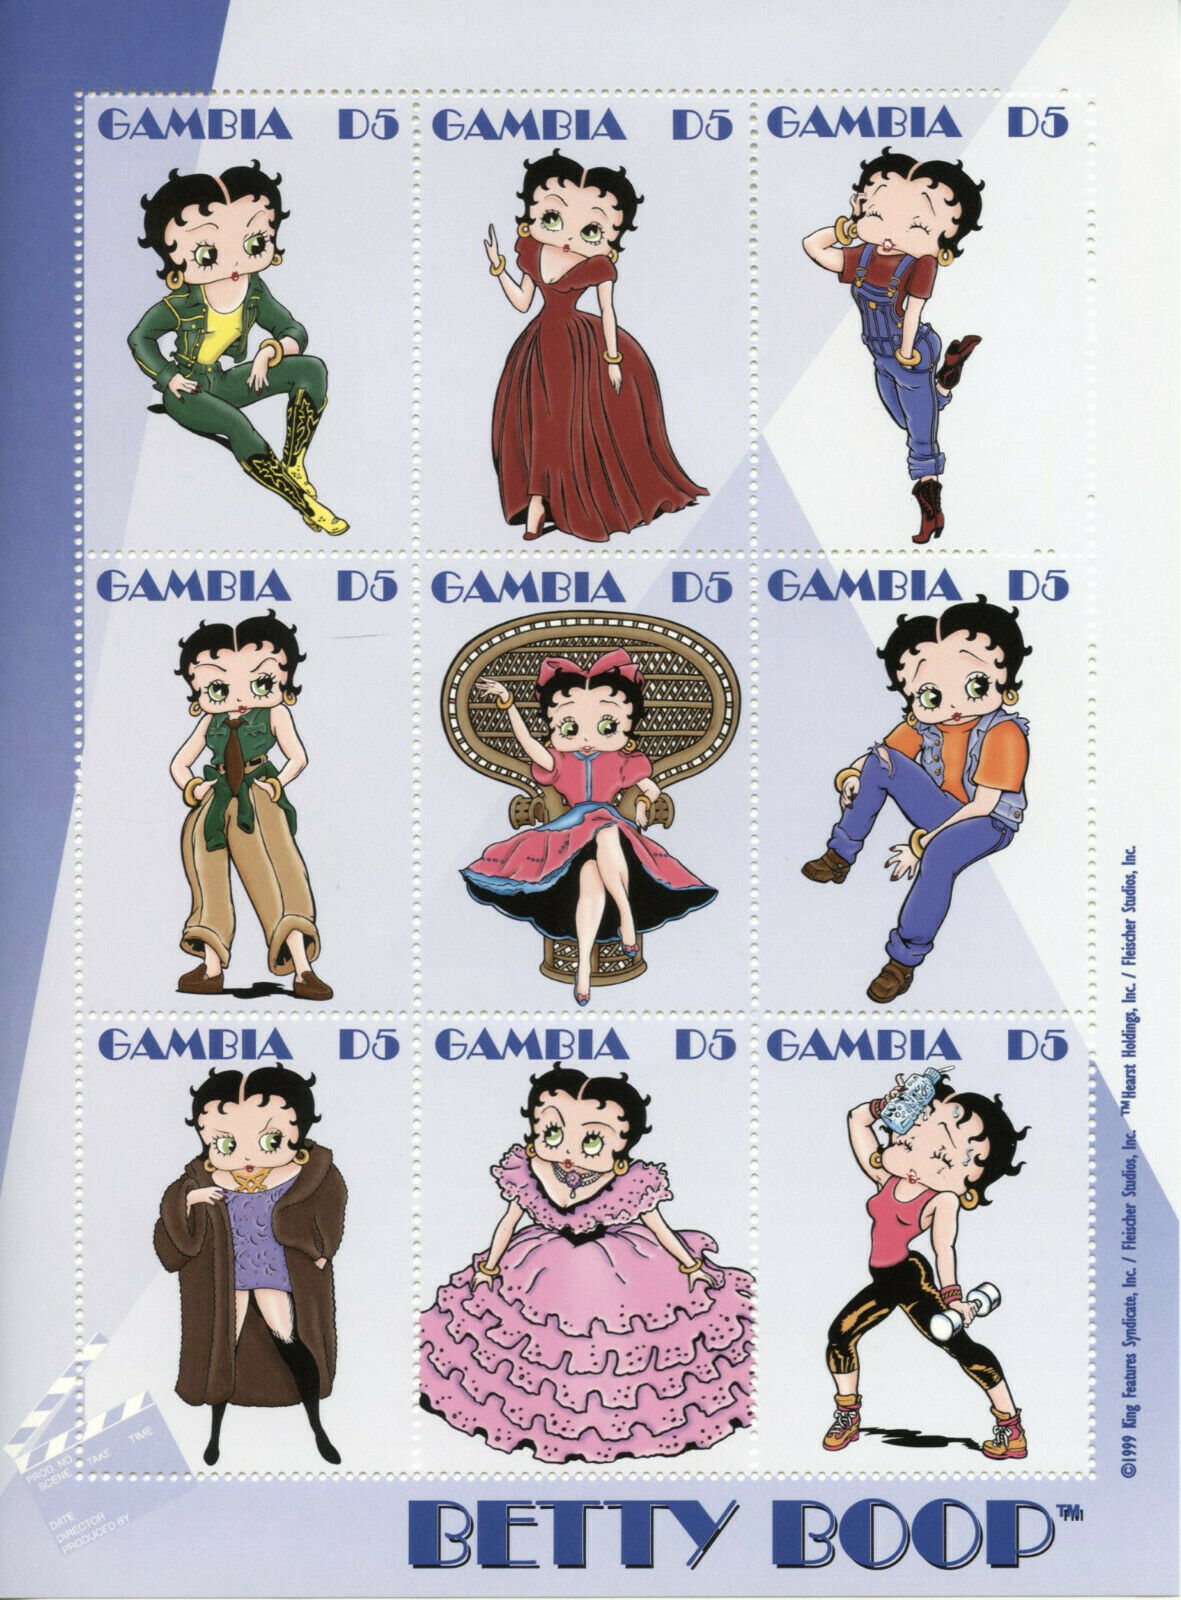 Gambia 2000 MNH Cartoons Stamps Betty Boop 9v M/S